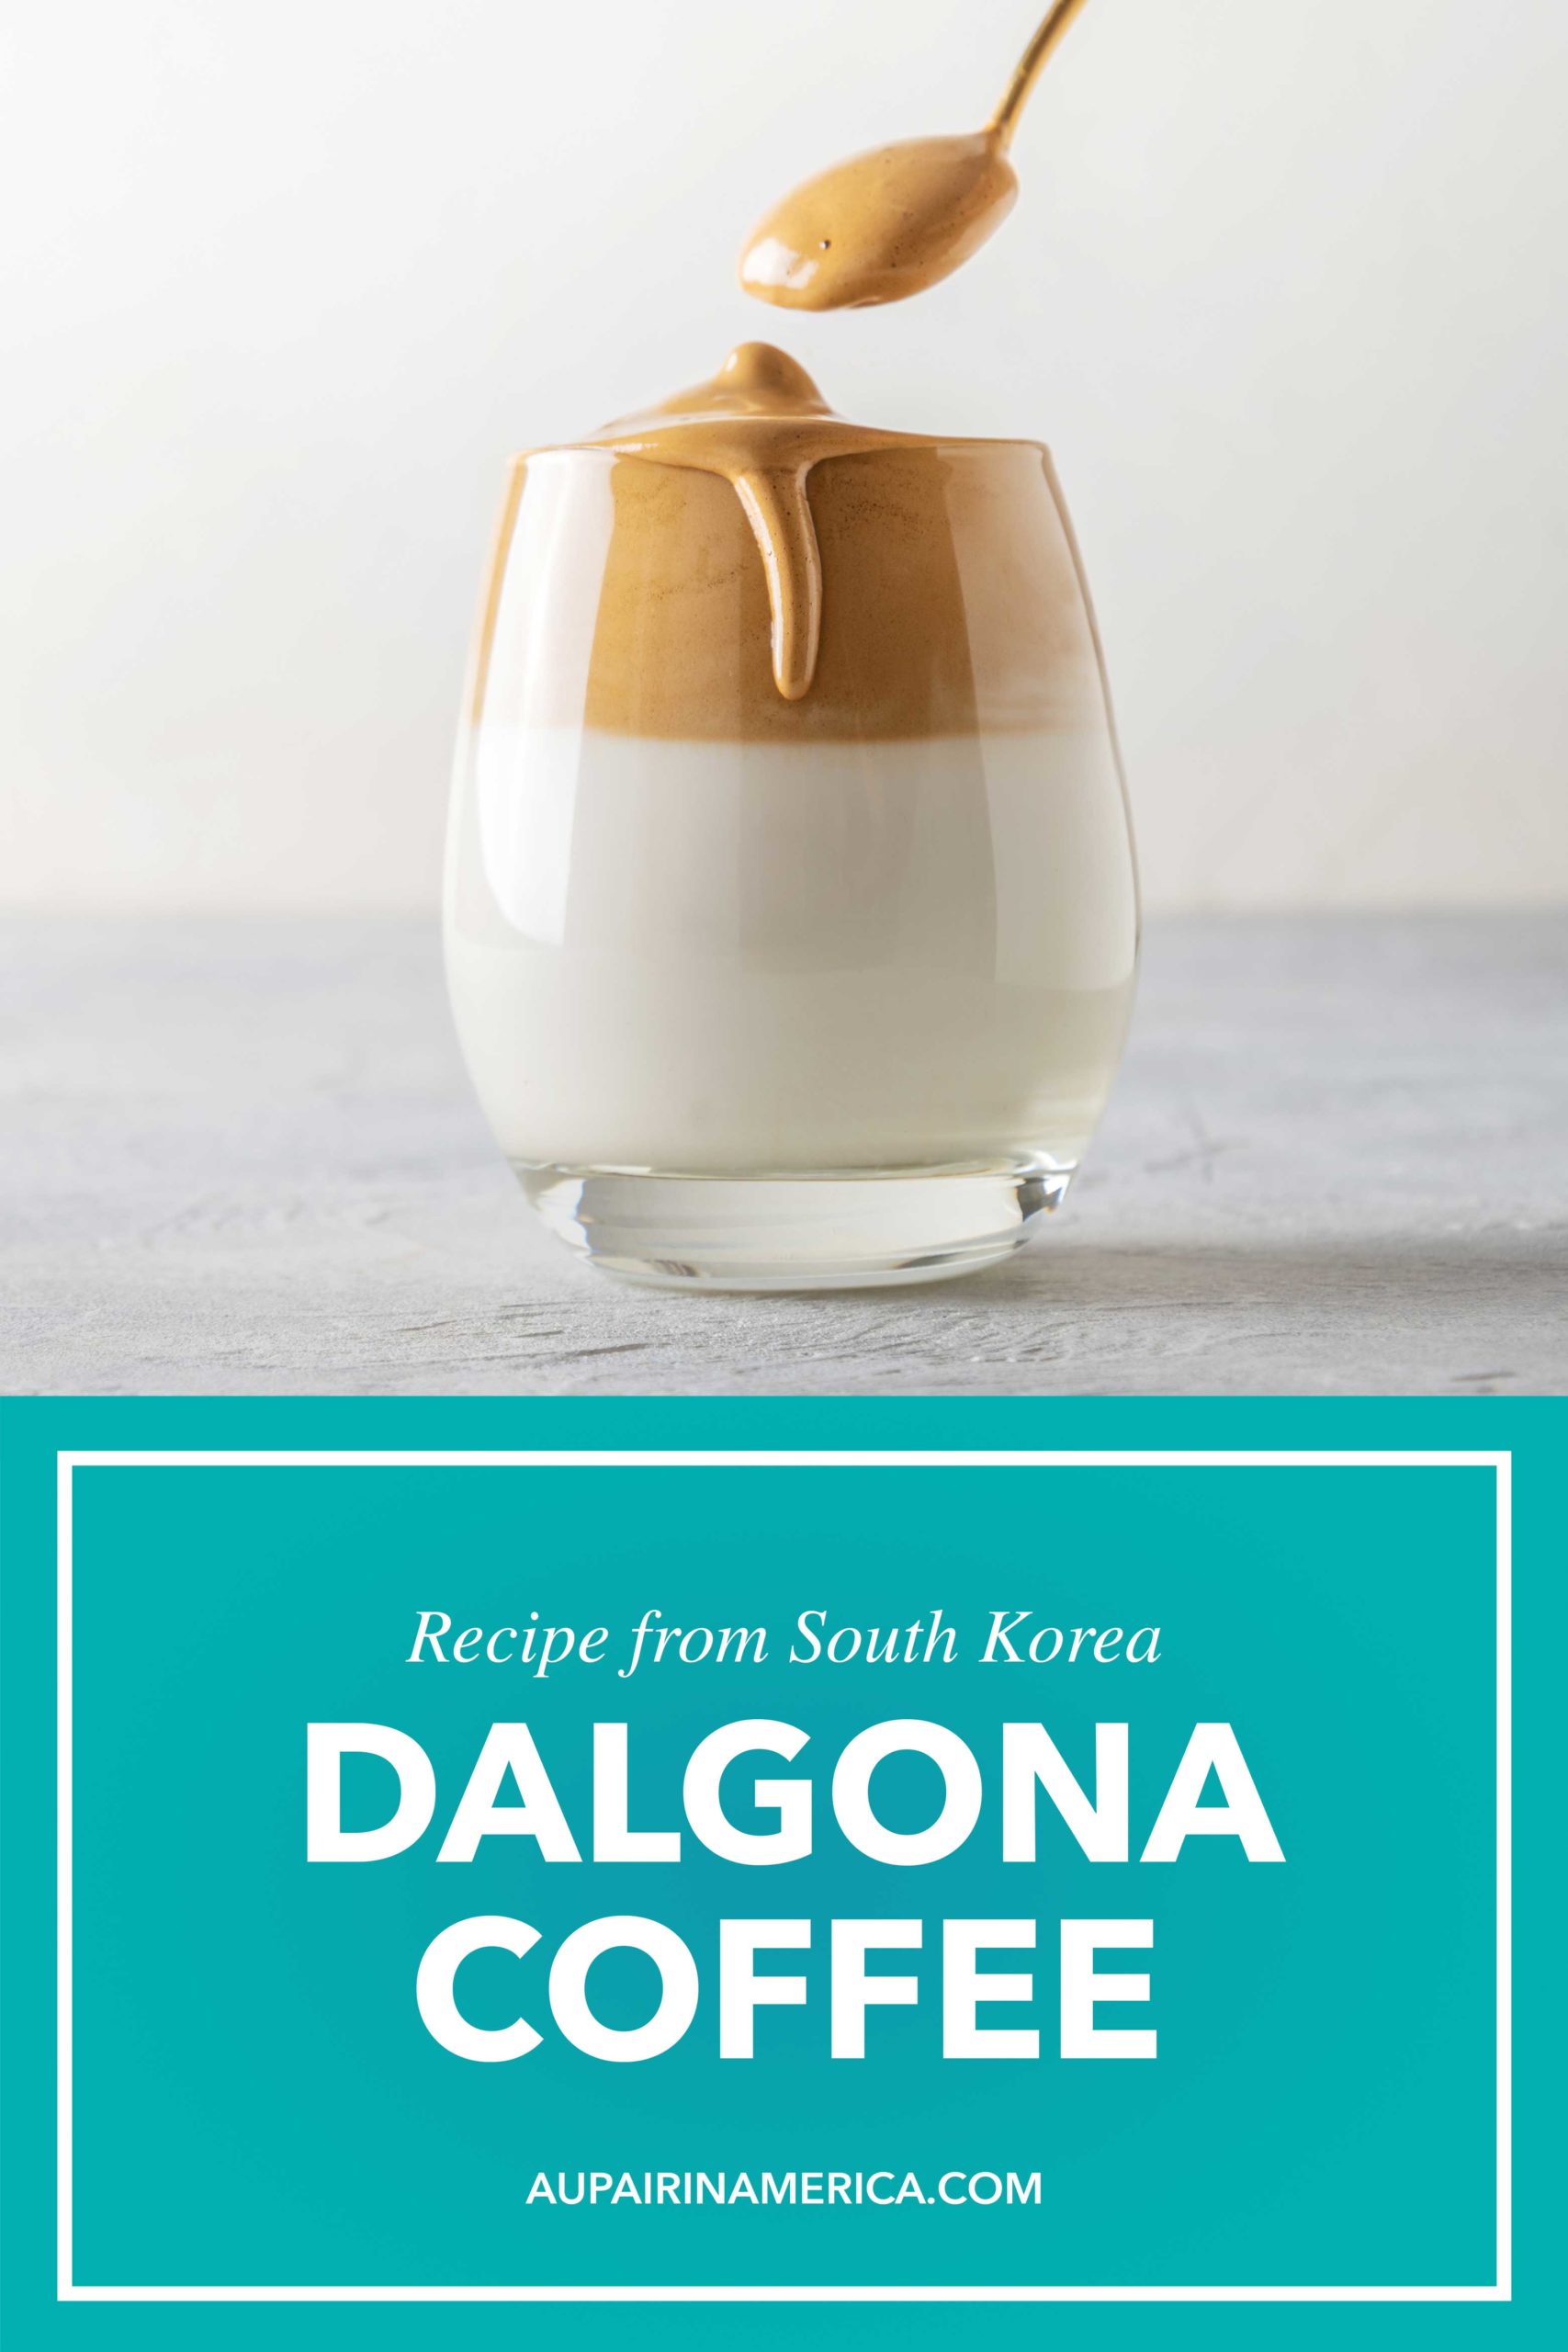 How to Make Dalgona Coffee, a whipped coffee from South Korea